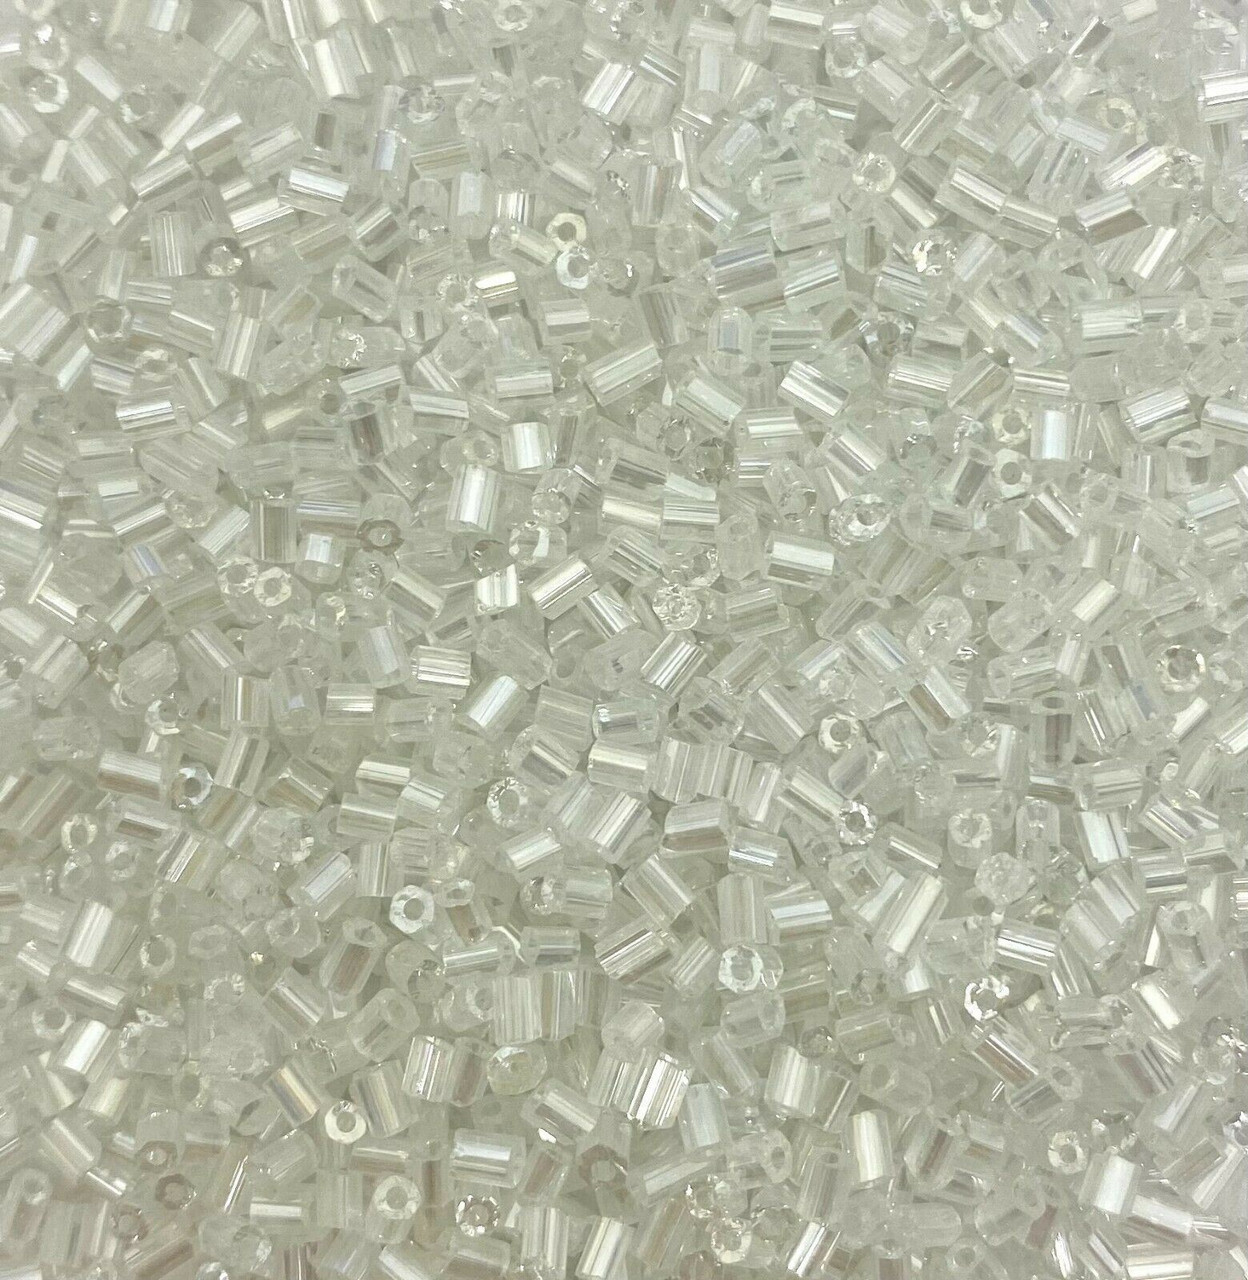 50g glass HEX seed beads - Clear Transparent Lustred - size 11/0 (approx 2mm)